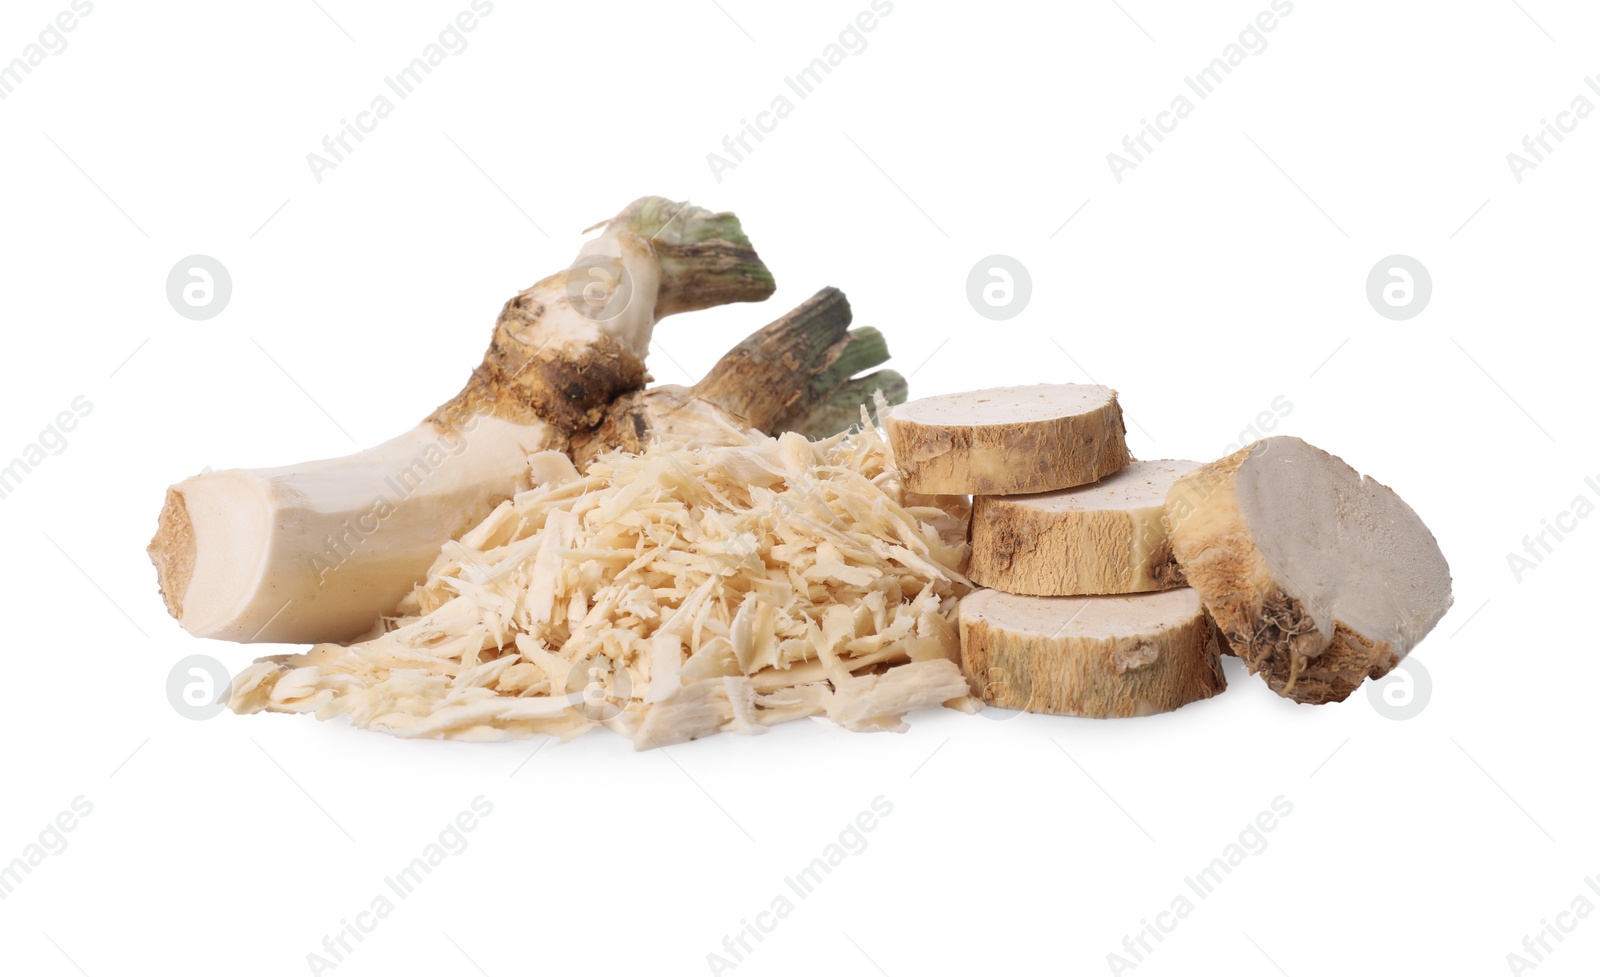 Photo of Grated and cut horseradish root isolated on white